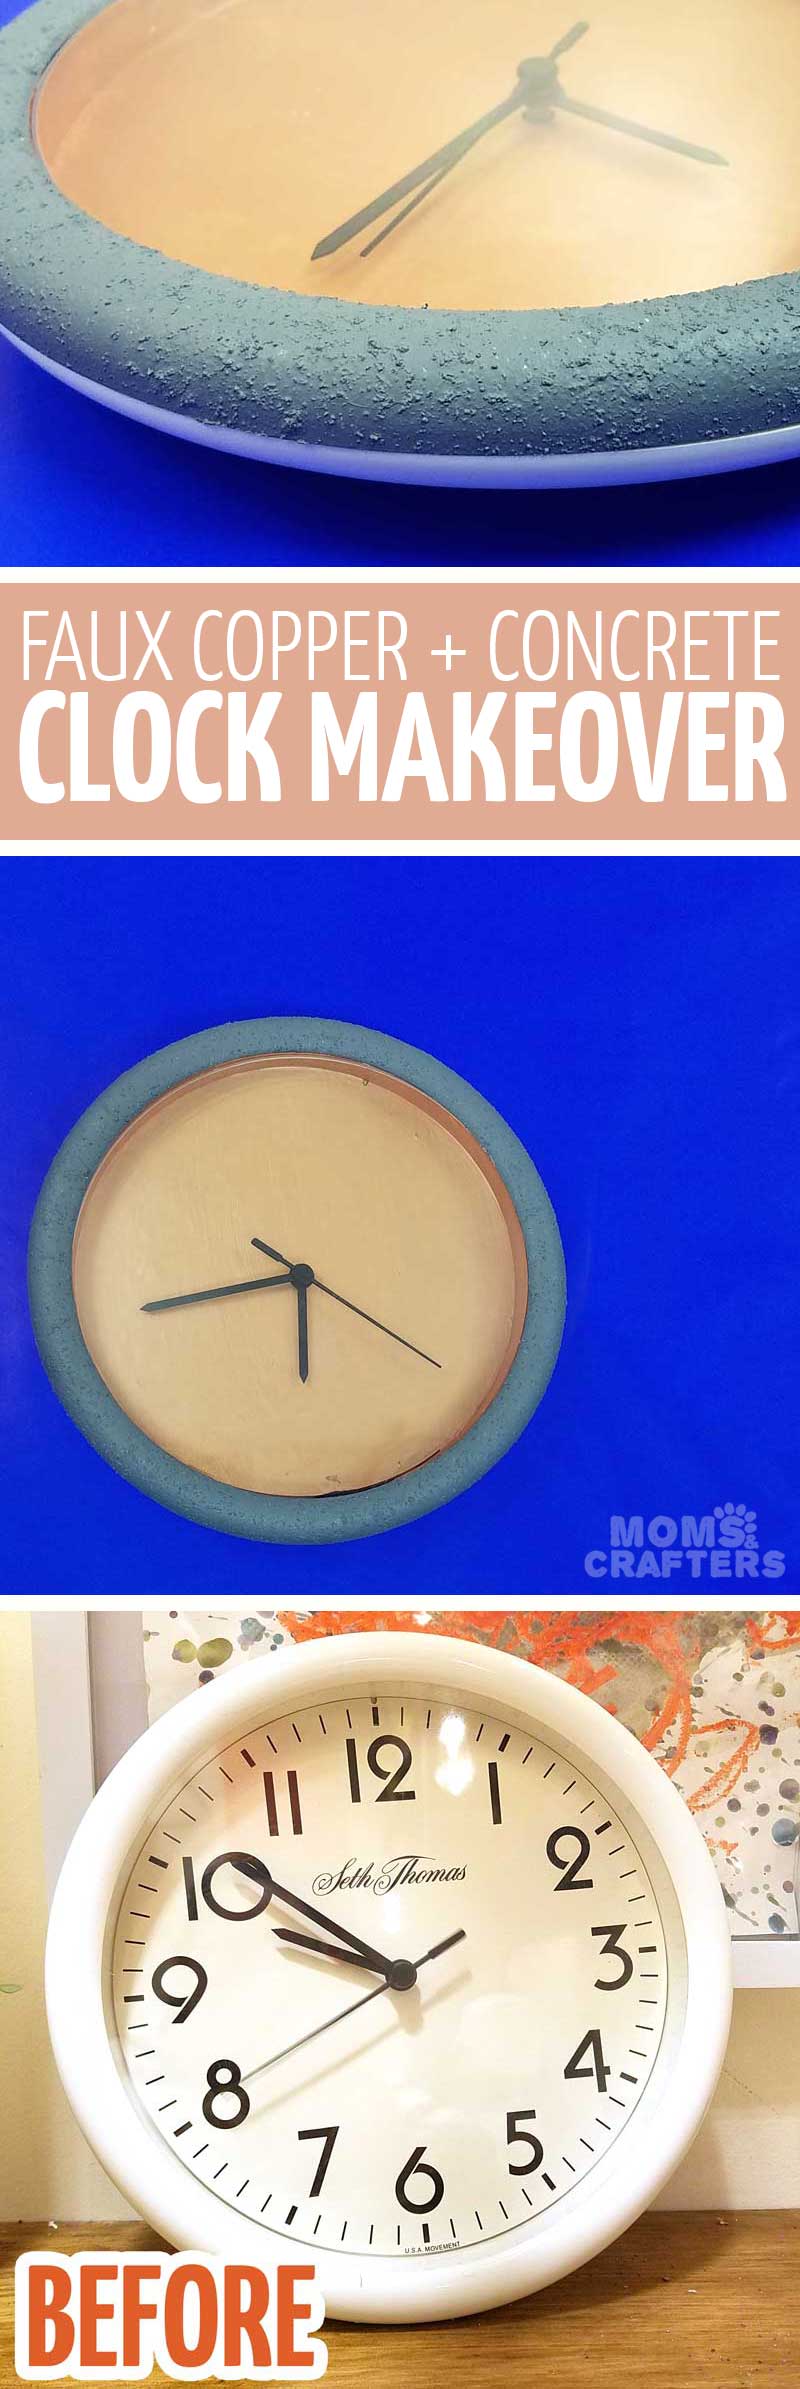 Spend ten minutes transforming an old plastic clock and look at the beautiful concrete and brushed metal home decor you can get! This epic flea market or thrift store clock makeover is so easy and good for beginners - and all it takes is some paint. #concrete #homedecor #fleamarketflip